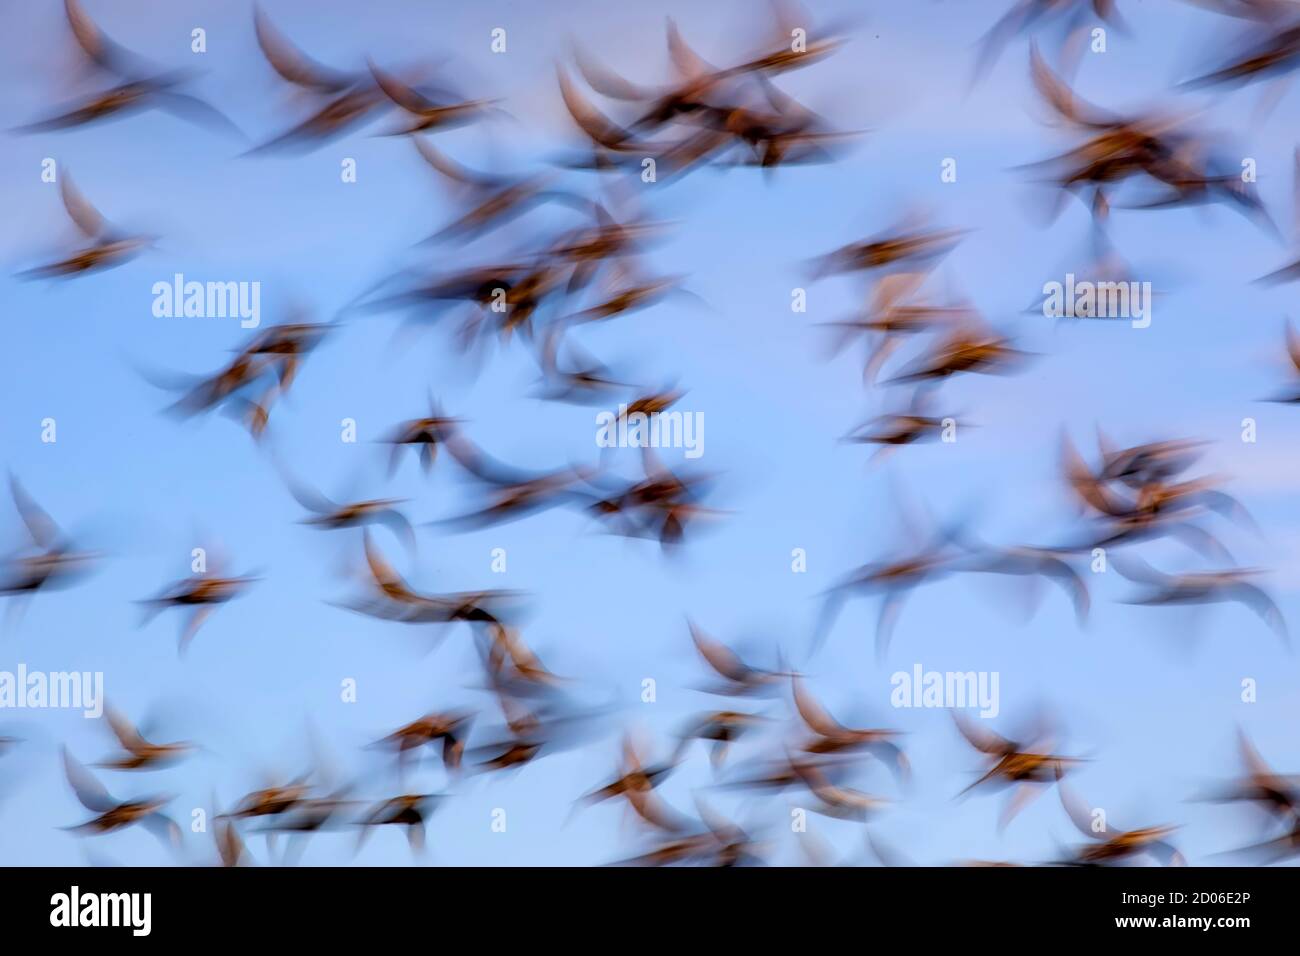 Flying birds. Abstract nature background. Motion blur background. Stock Photo